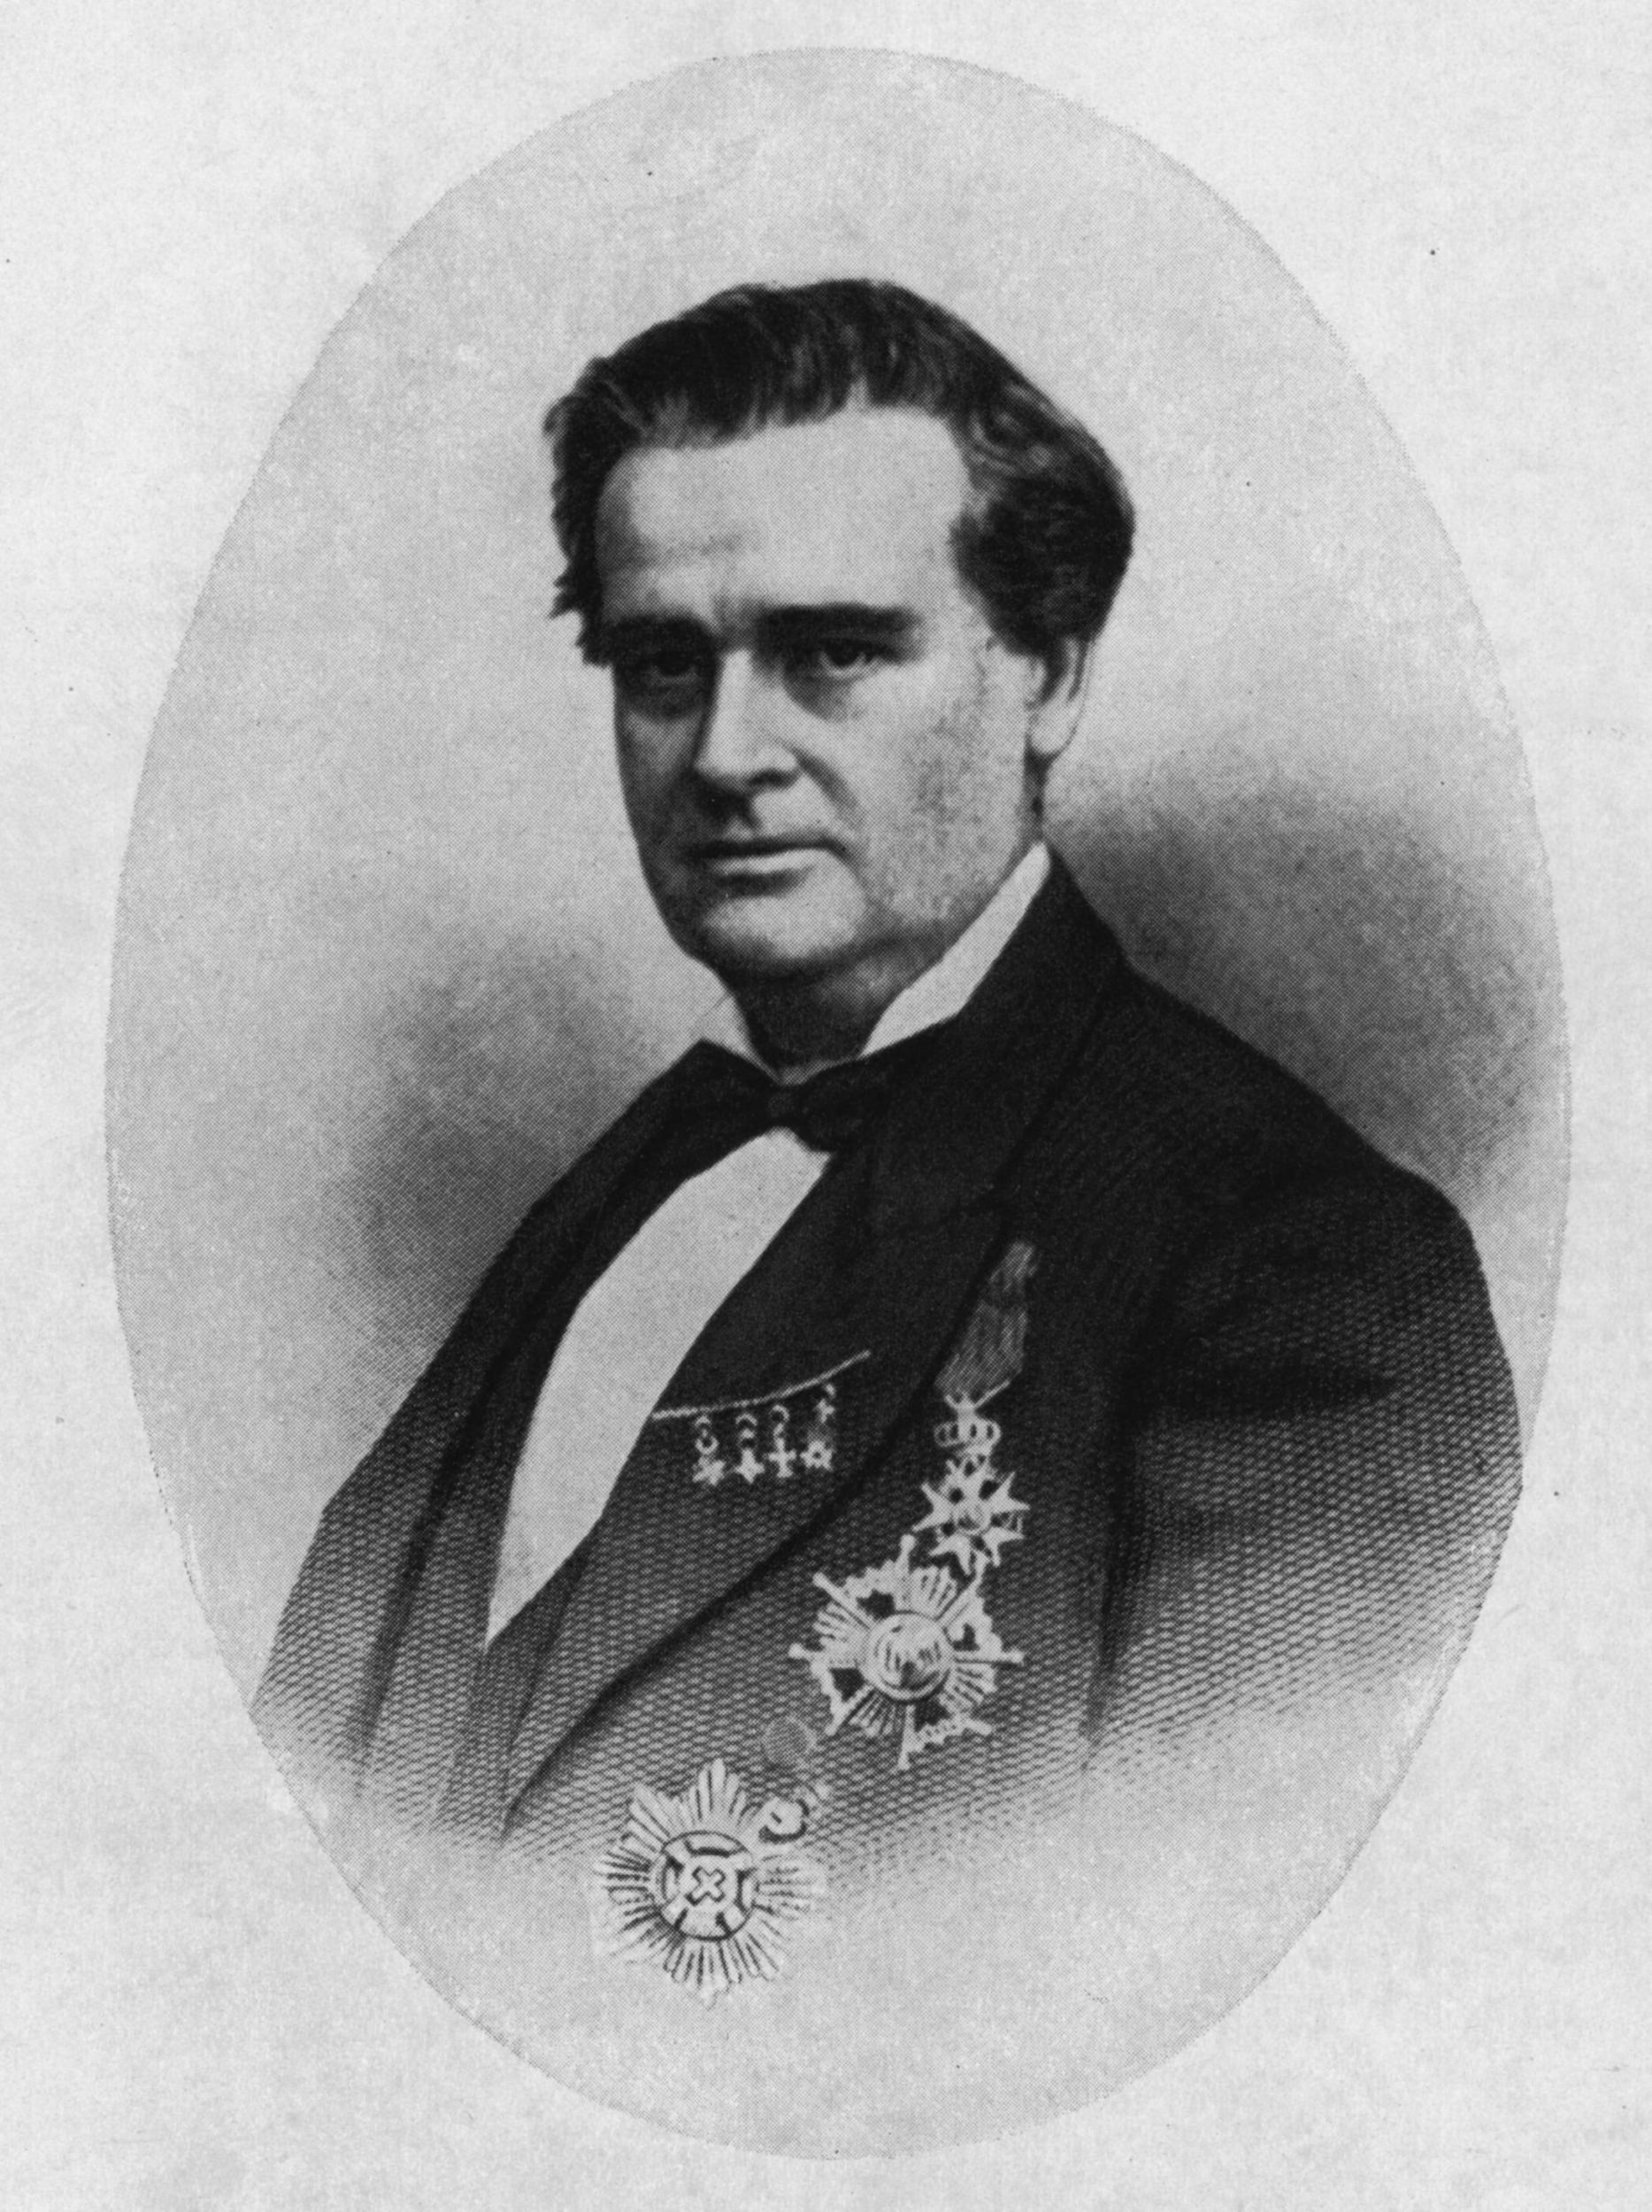 James Marion Sims was known as the 'father of modern gynecology